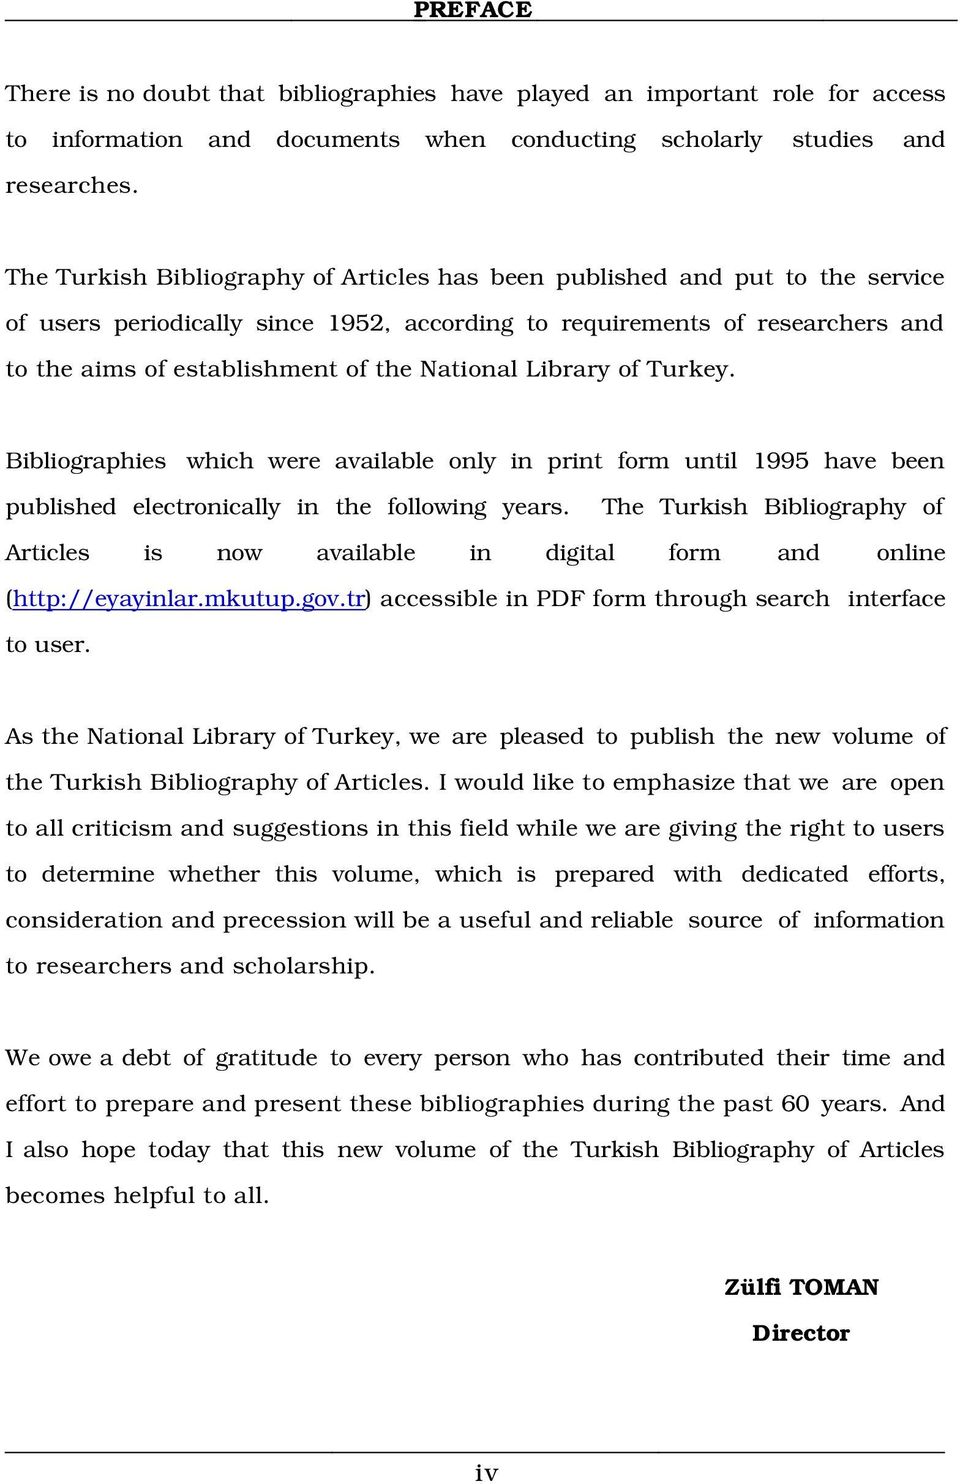 National Library of Turkey. Bibliographies which were available only in print form until 1995 have been published electronically in the following years.